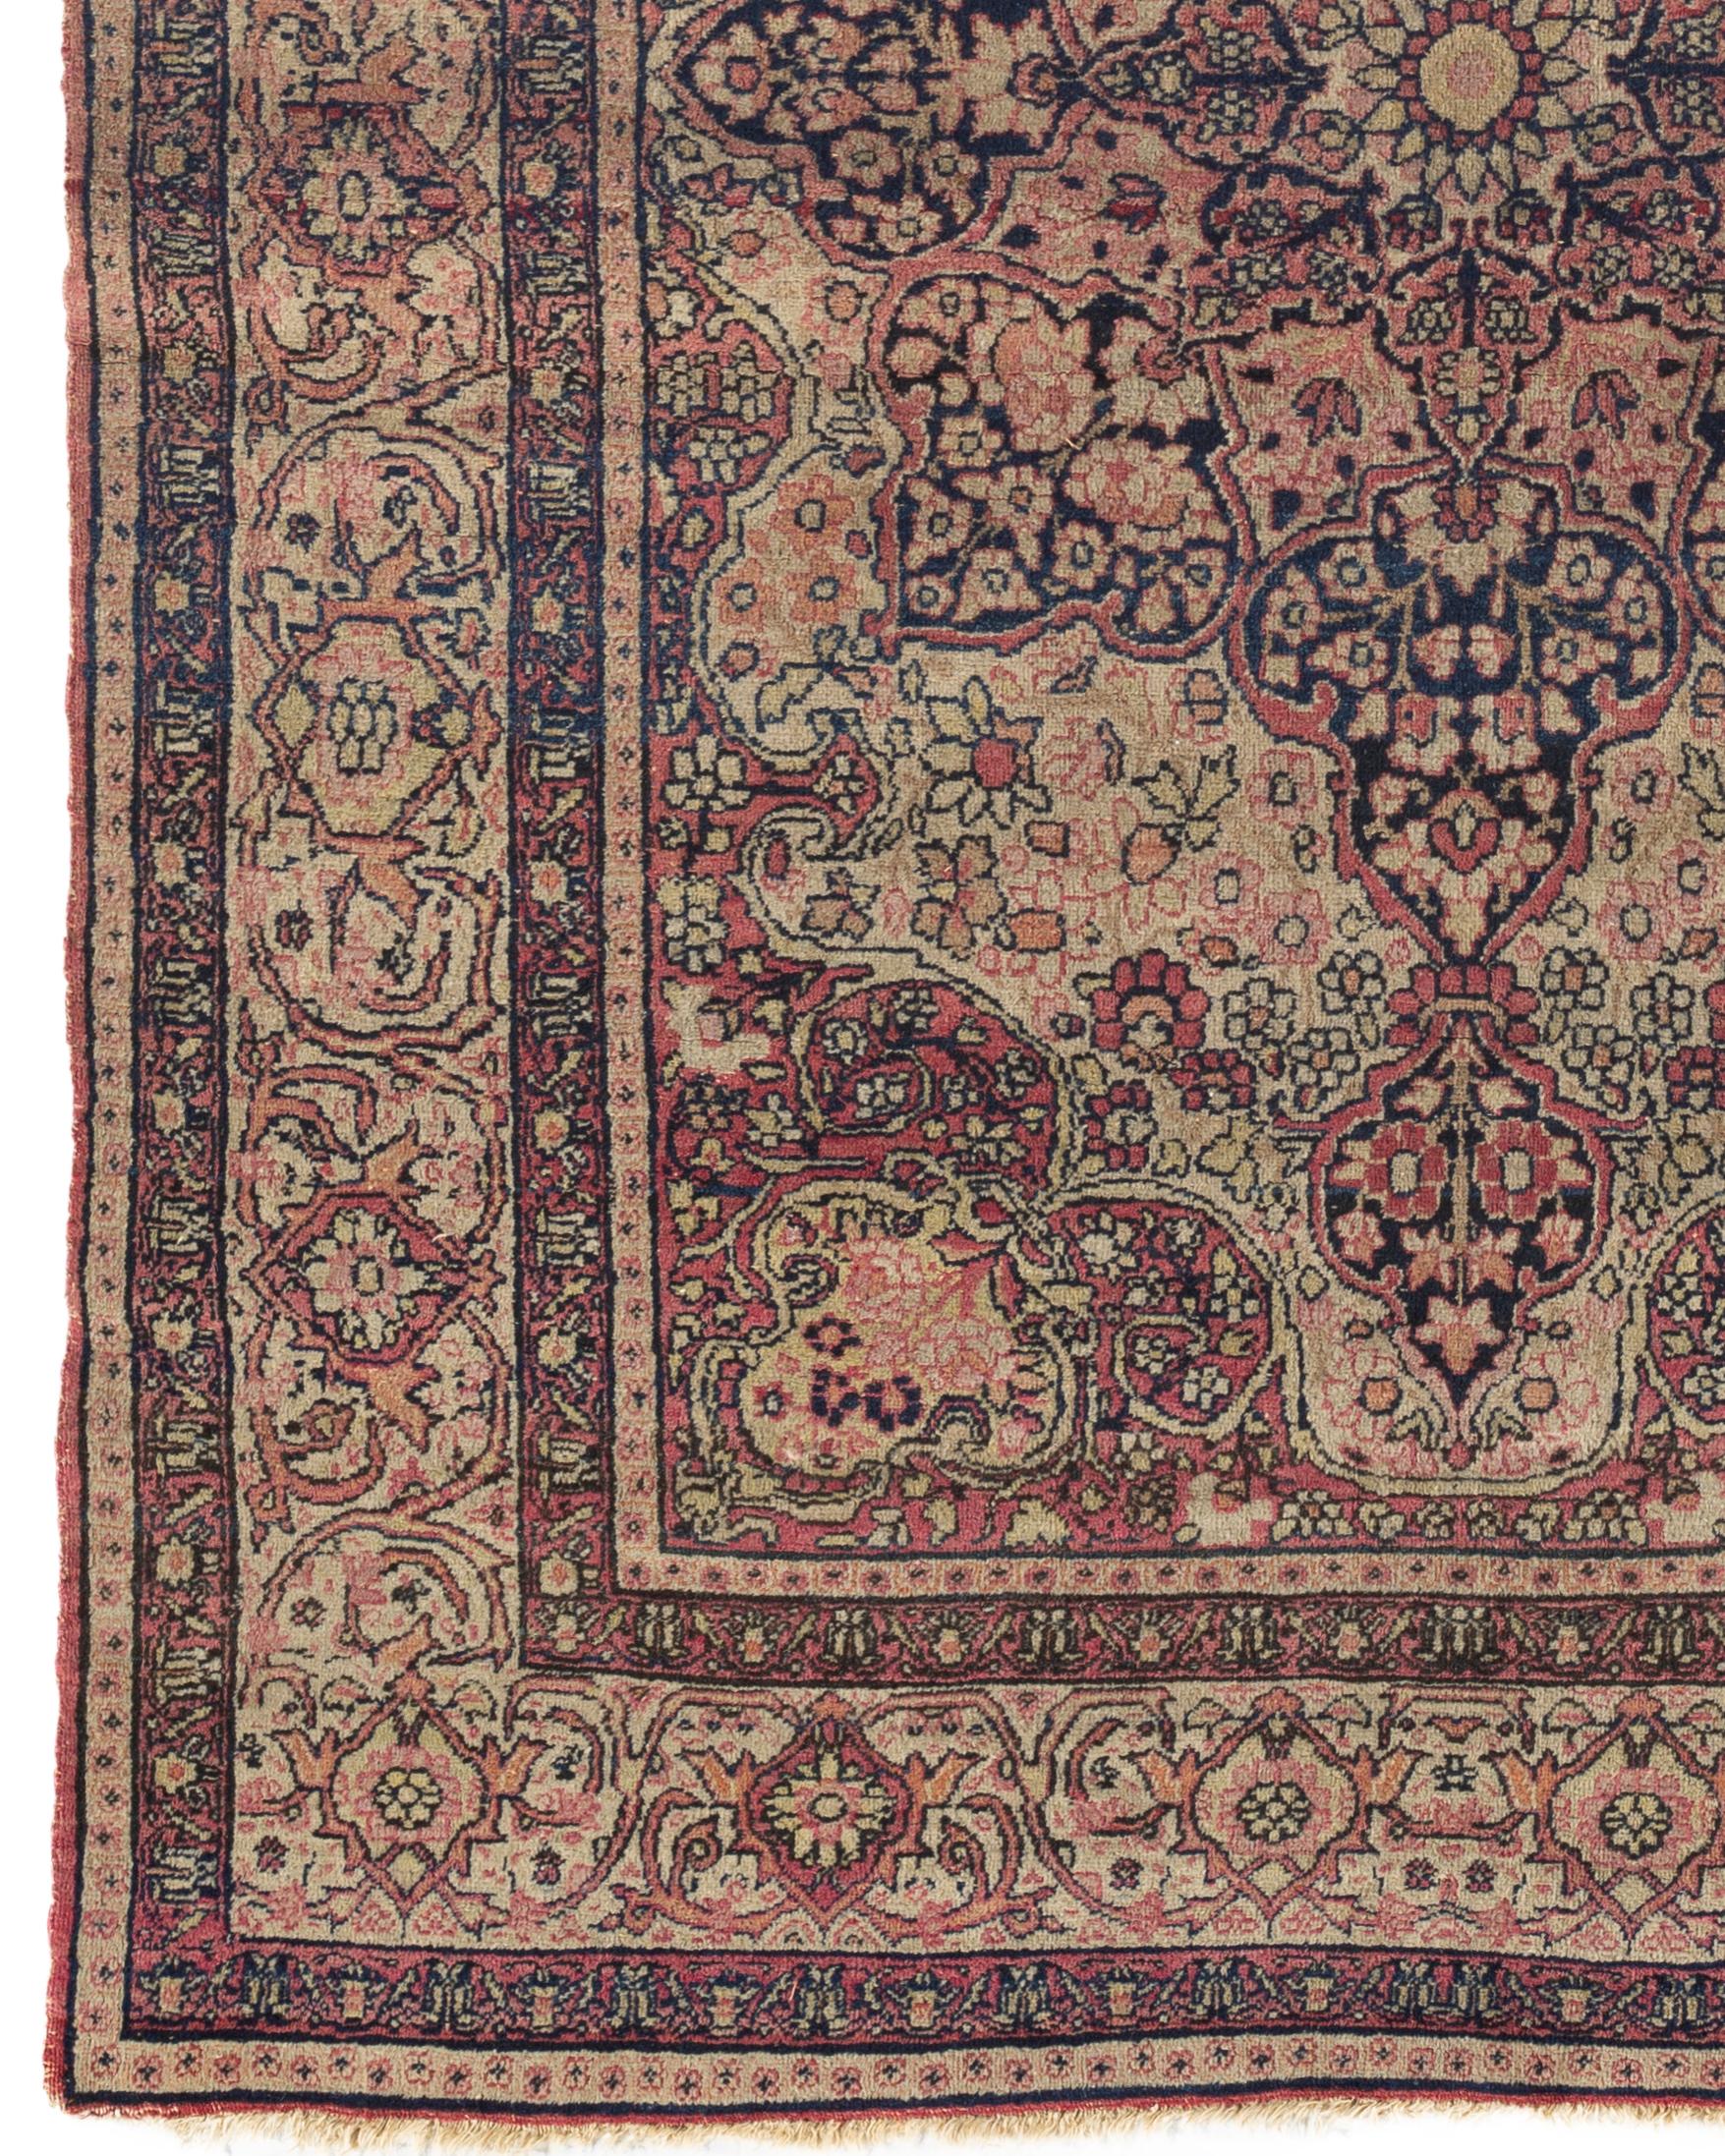 Antique Persian Kirman Lavar Rug, circa 1880. Some of the finest rugs in the world come from the famous weaving area known as Lavar or Ravar. Situated around 60 miles north of Kirman they have been weaving rugs of exceptional quality for over 200